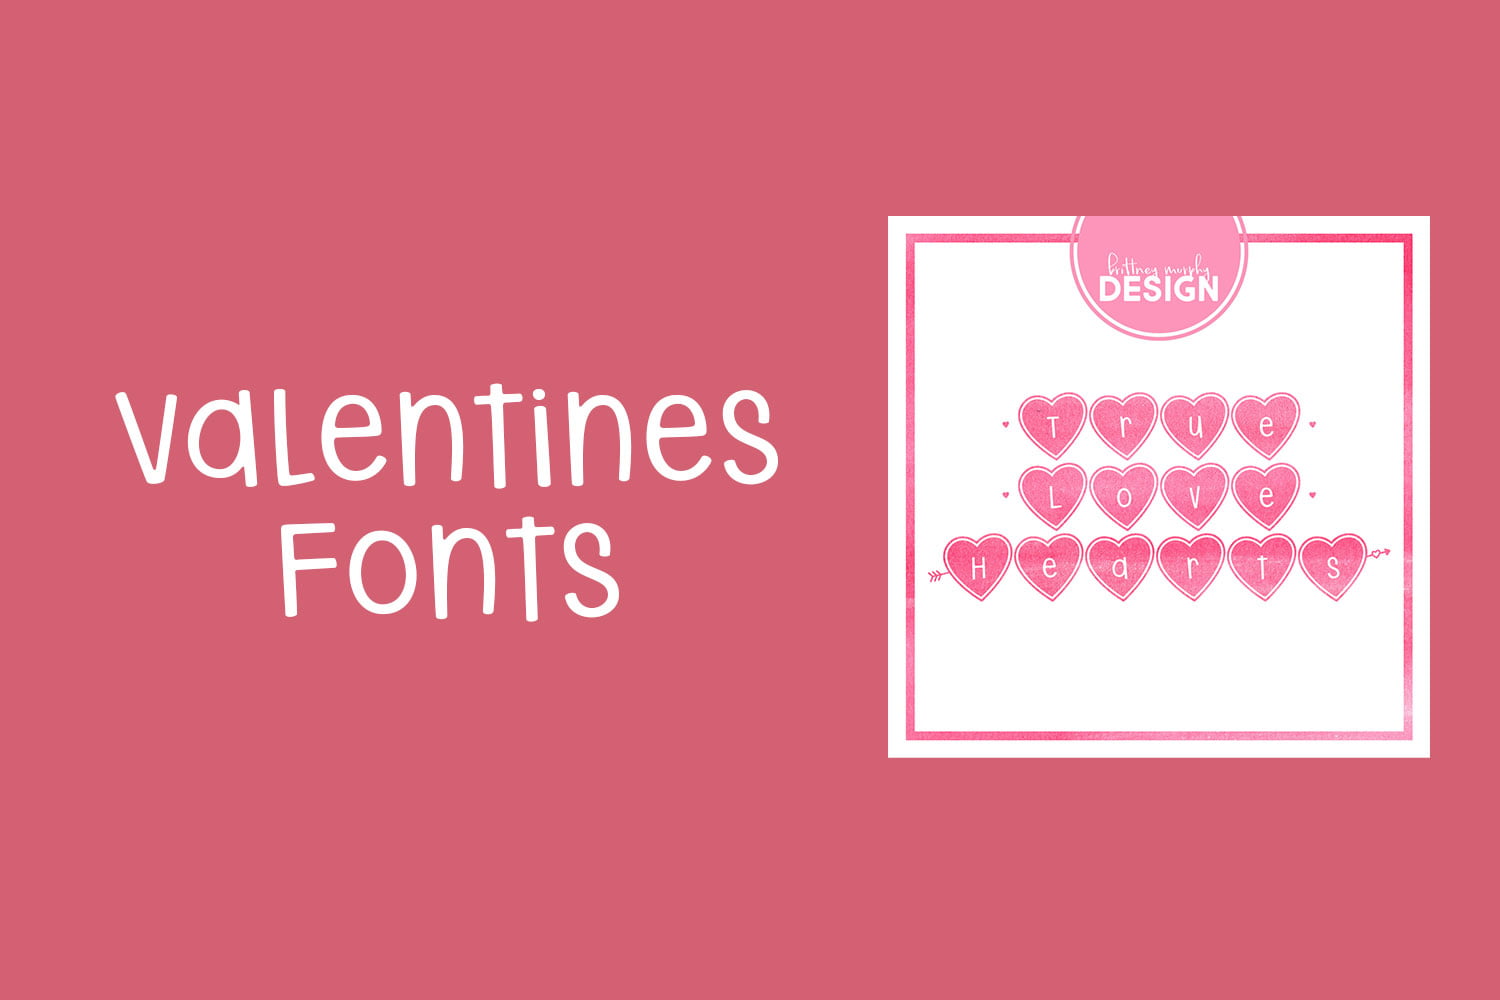 Fonts with Hearts